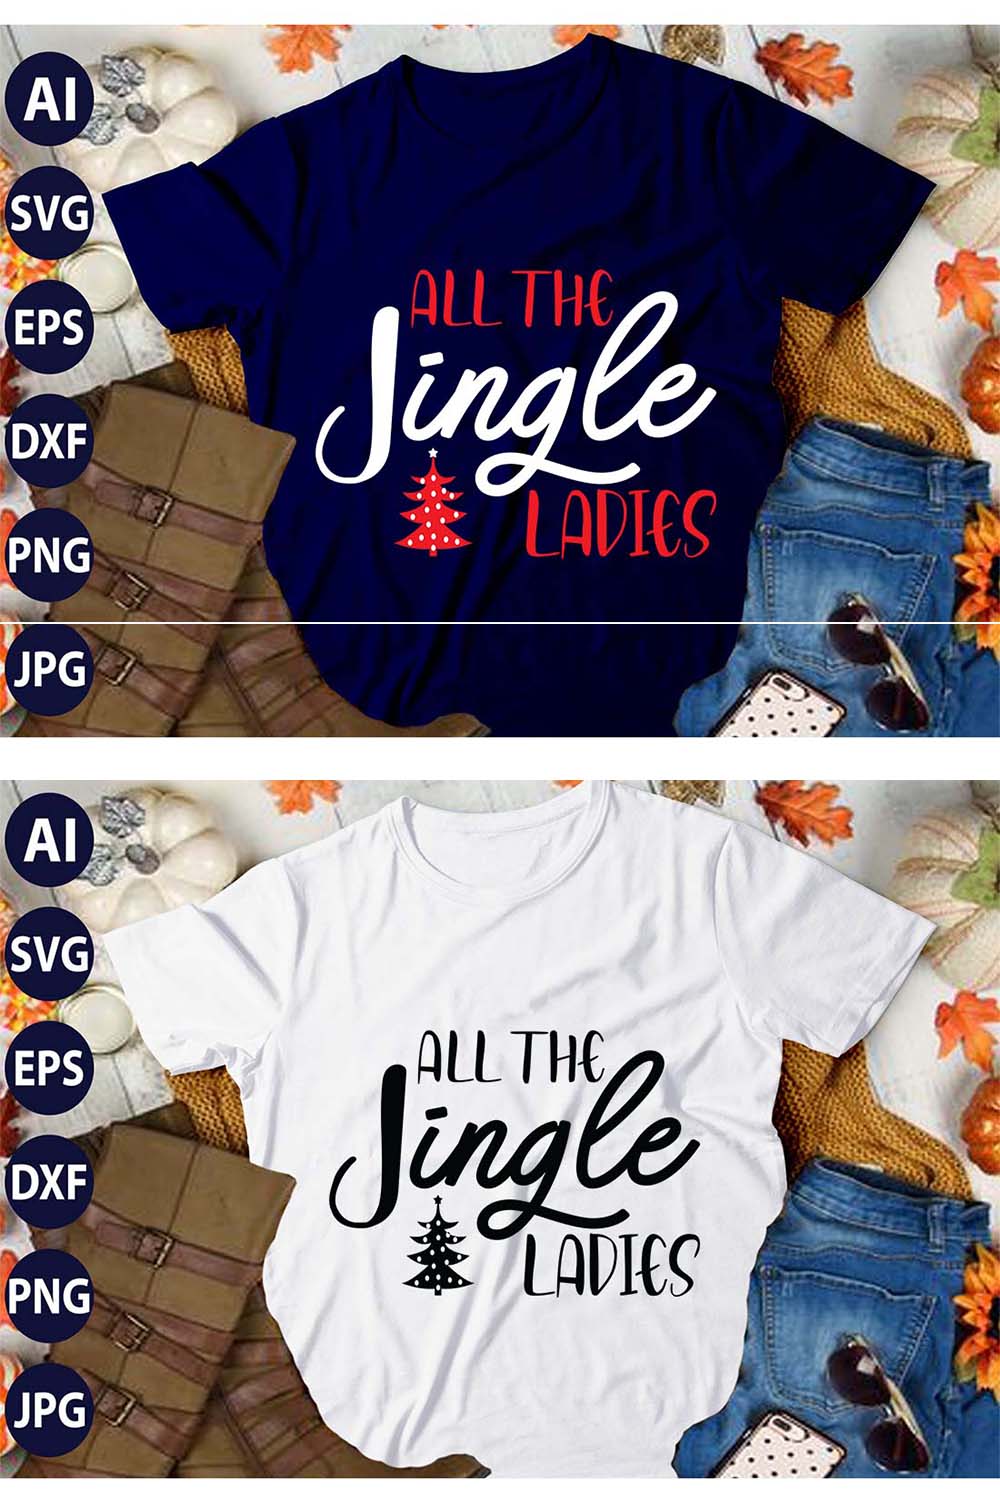 All The Jingle Ladies, SVG T-Shirt Design |Christmas Retro It's All About Jesus Typography Tshirt Design | Ai, Svg, Eps, Dxf, Jpeg, Png, Instant download T-Shirt | 100% print-ready Digital vector file pinterest preview image.